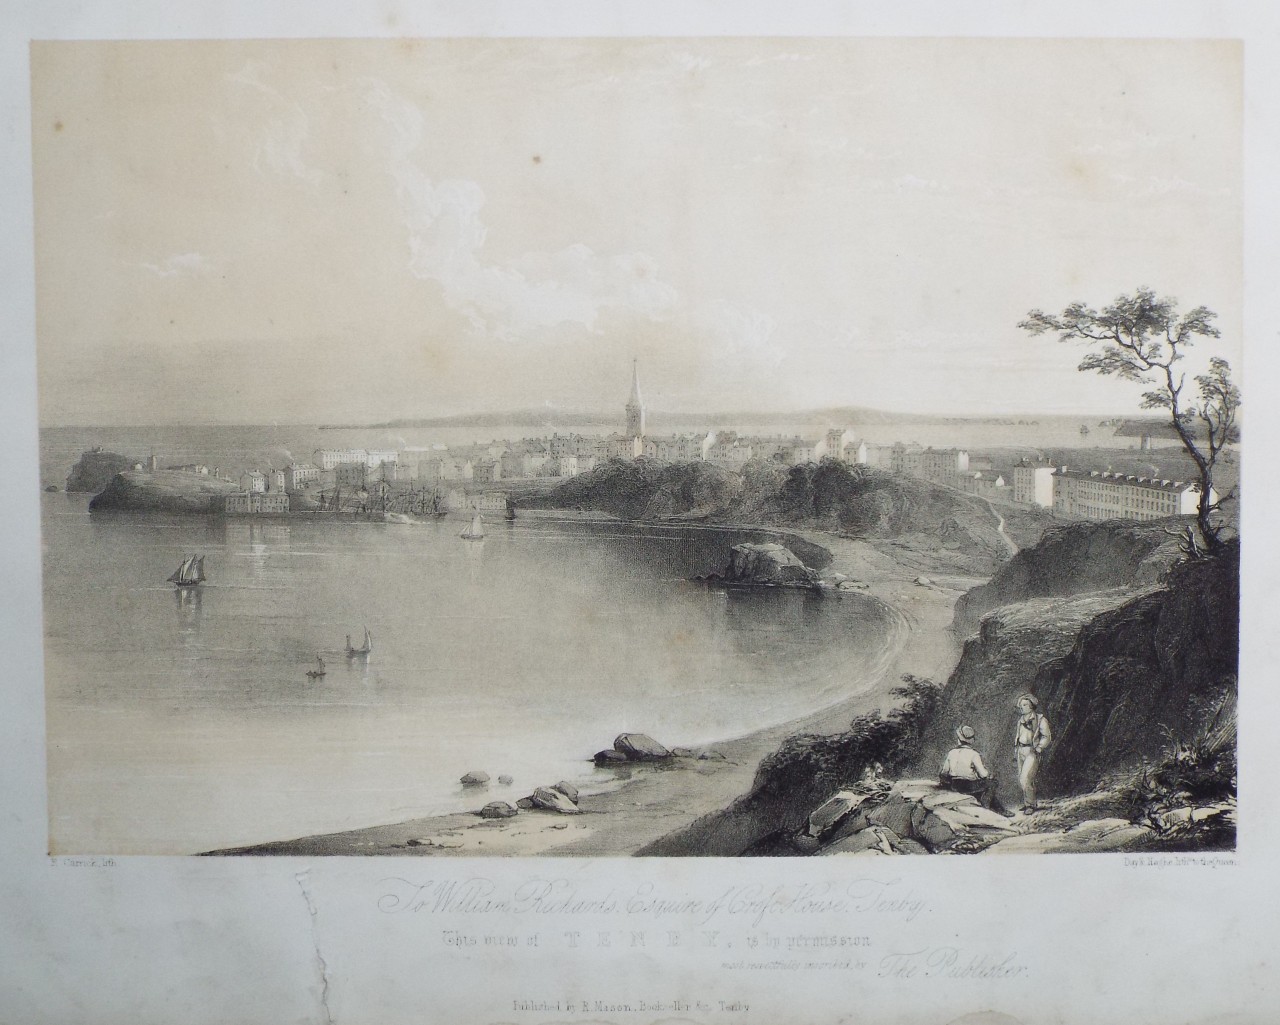 Lithograph - To William Richards, Esqruire of Croft House, Tenby, This View of Tenby, is by permission most repectfully inscribed by The Publisher. - Carrick